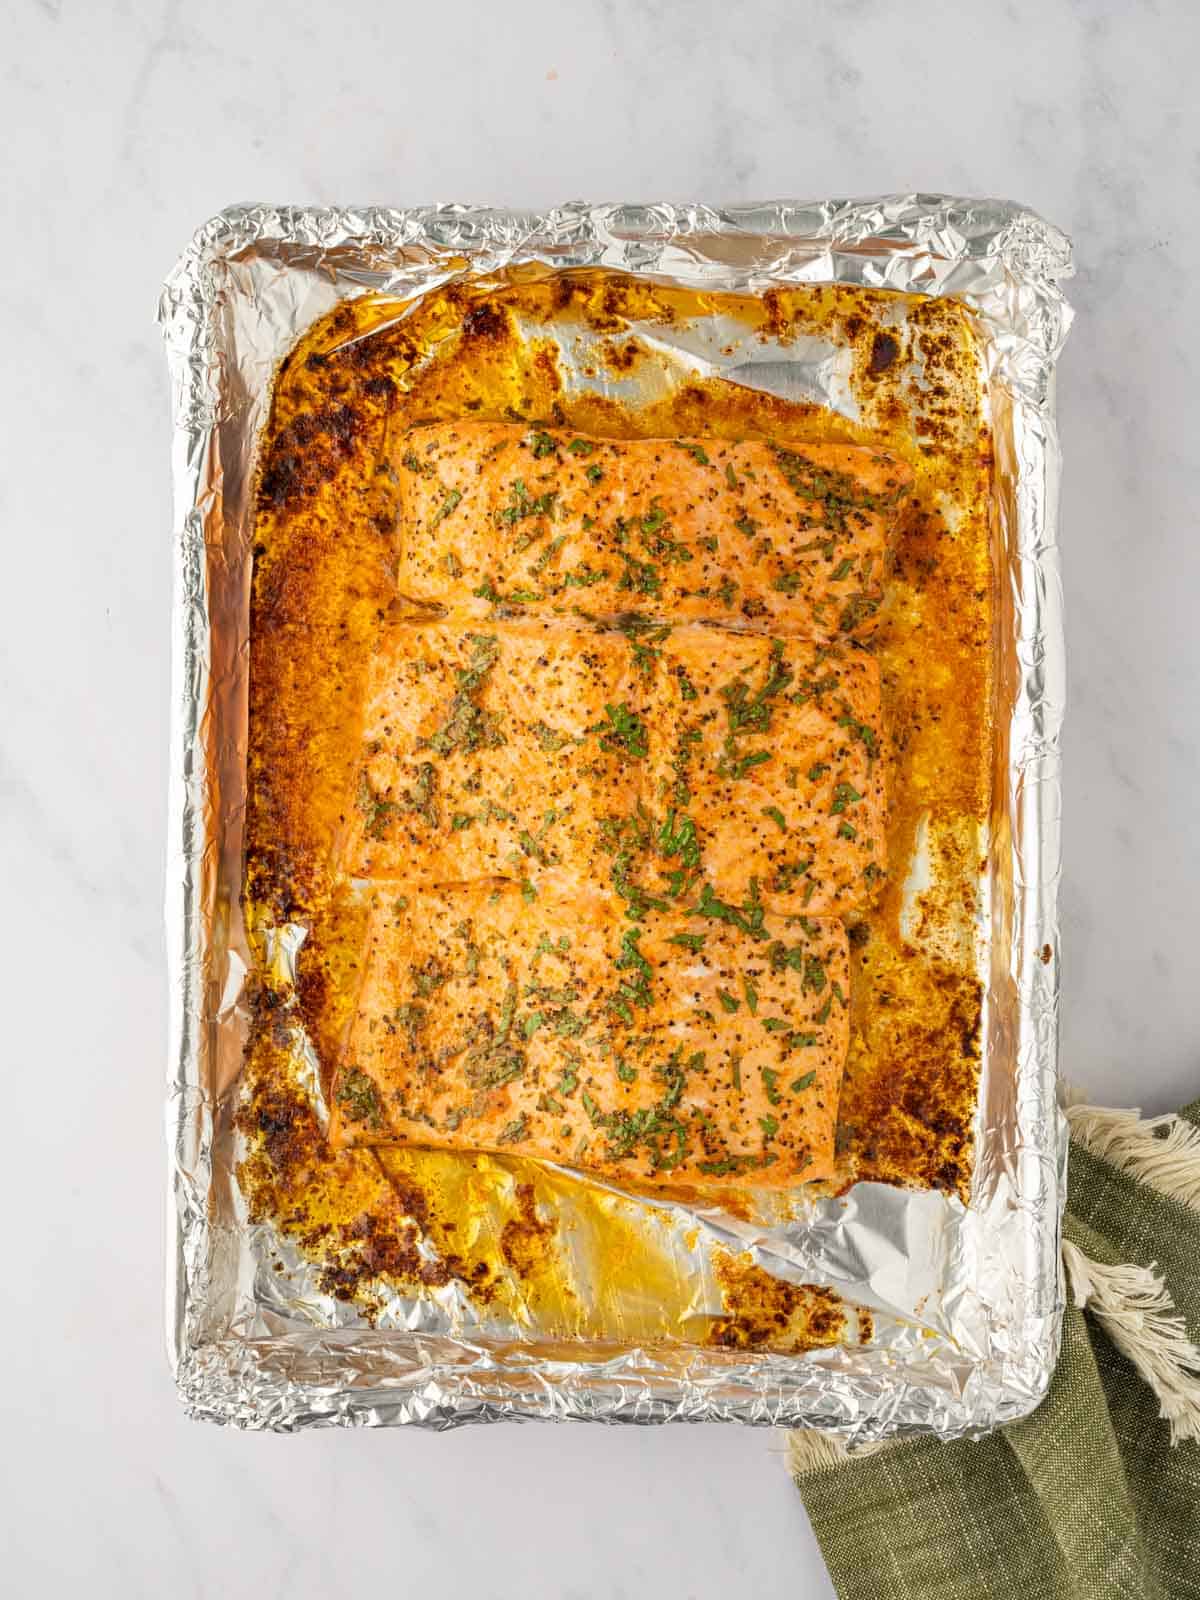 Baked salmon on a foil lined tray.